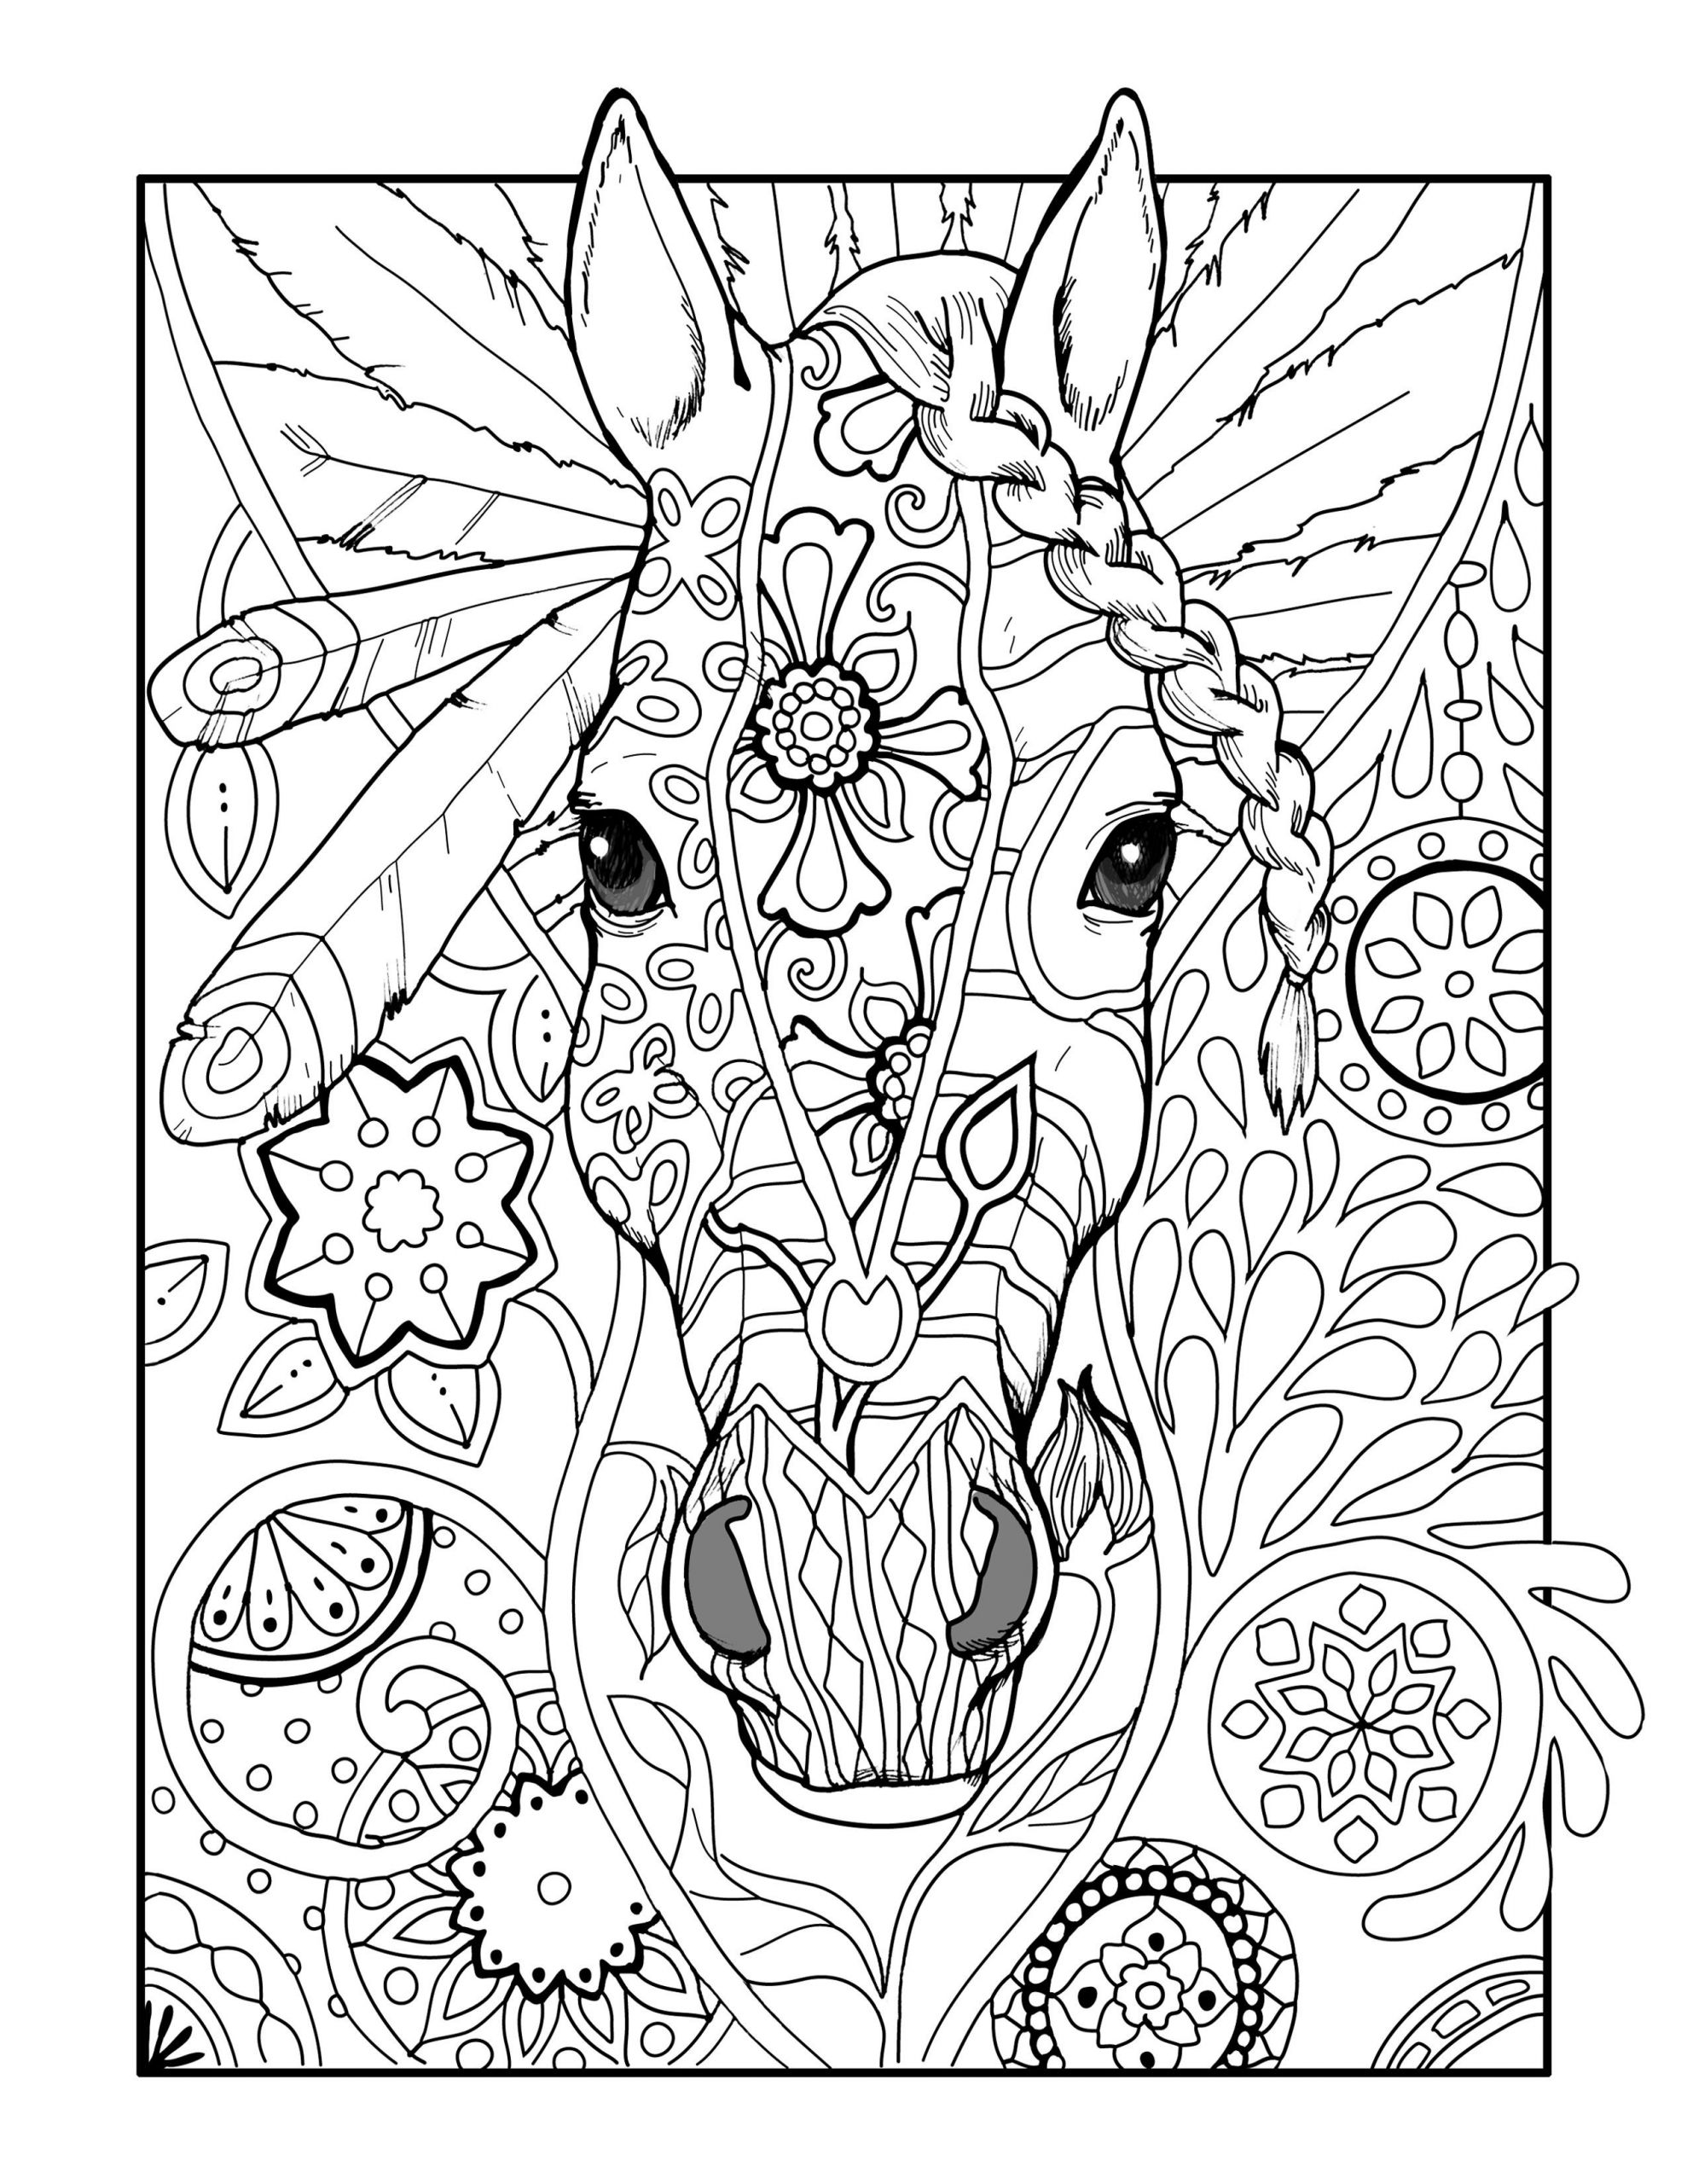 Unicorn Adult Coloring Book
 ESCAPE TO A WORLD OF FLYING CREATURES UNICORNS AND